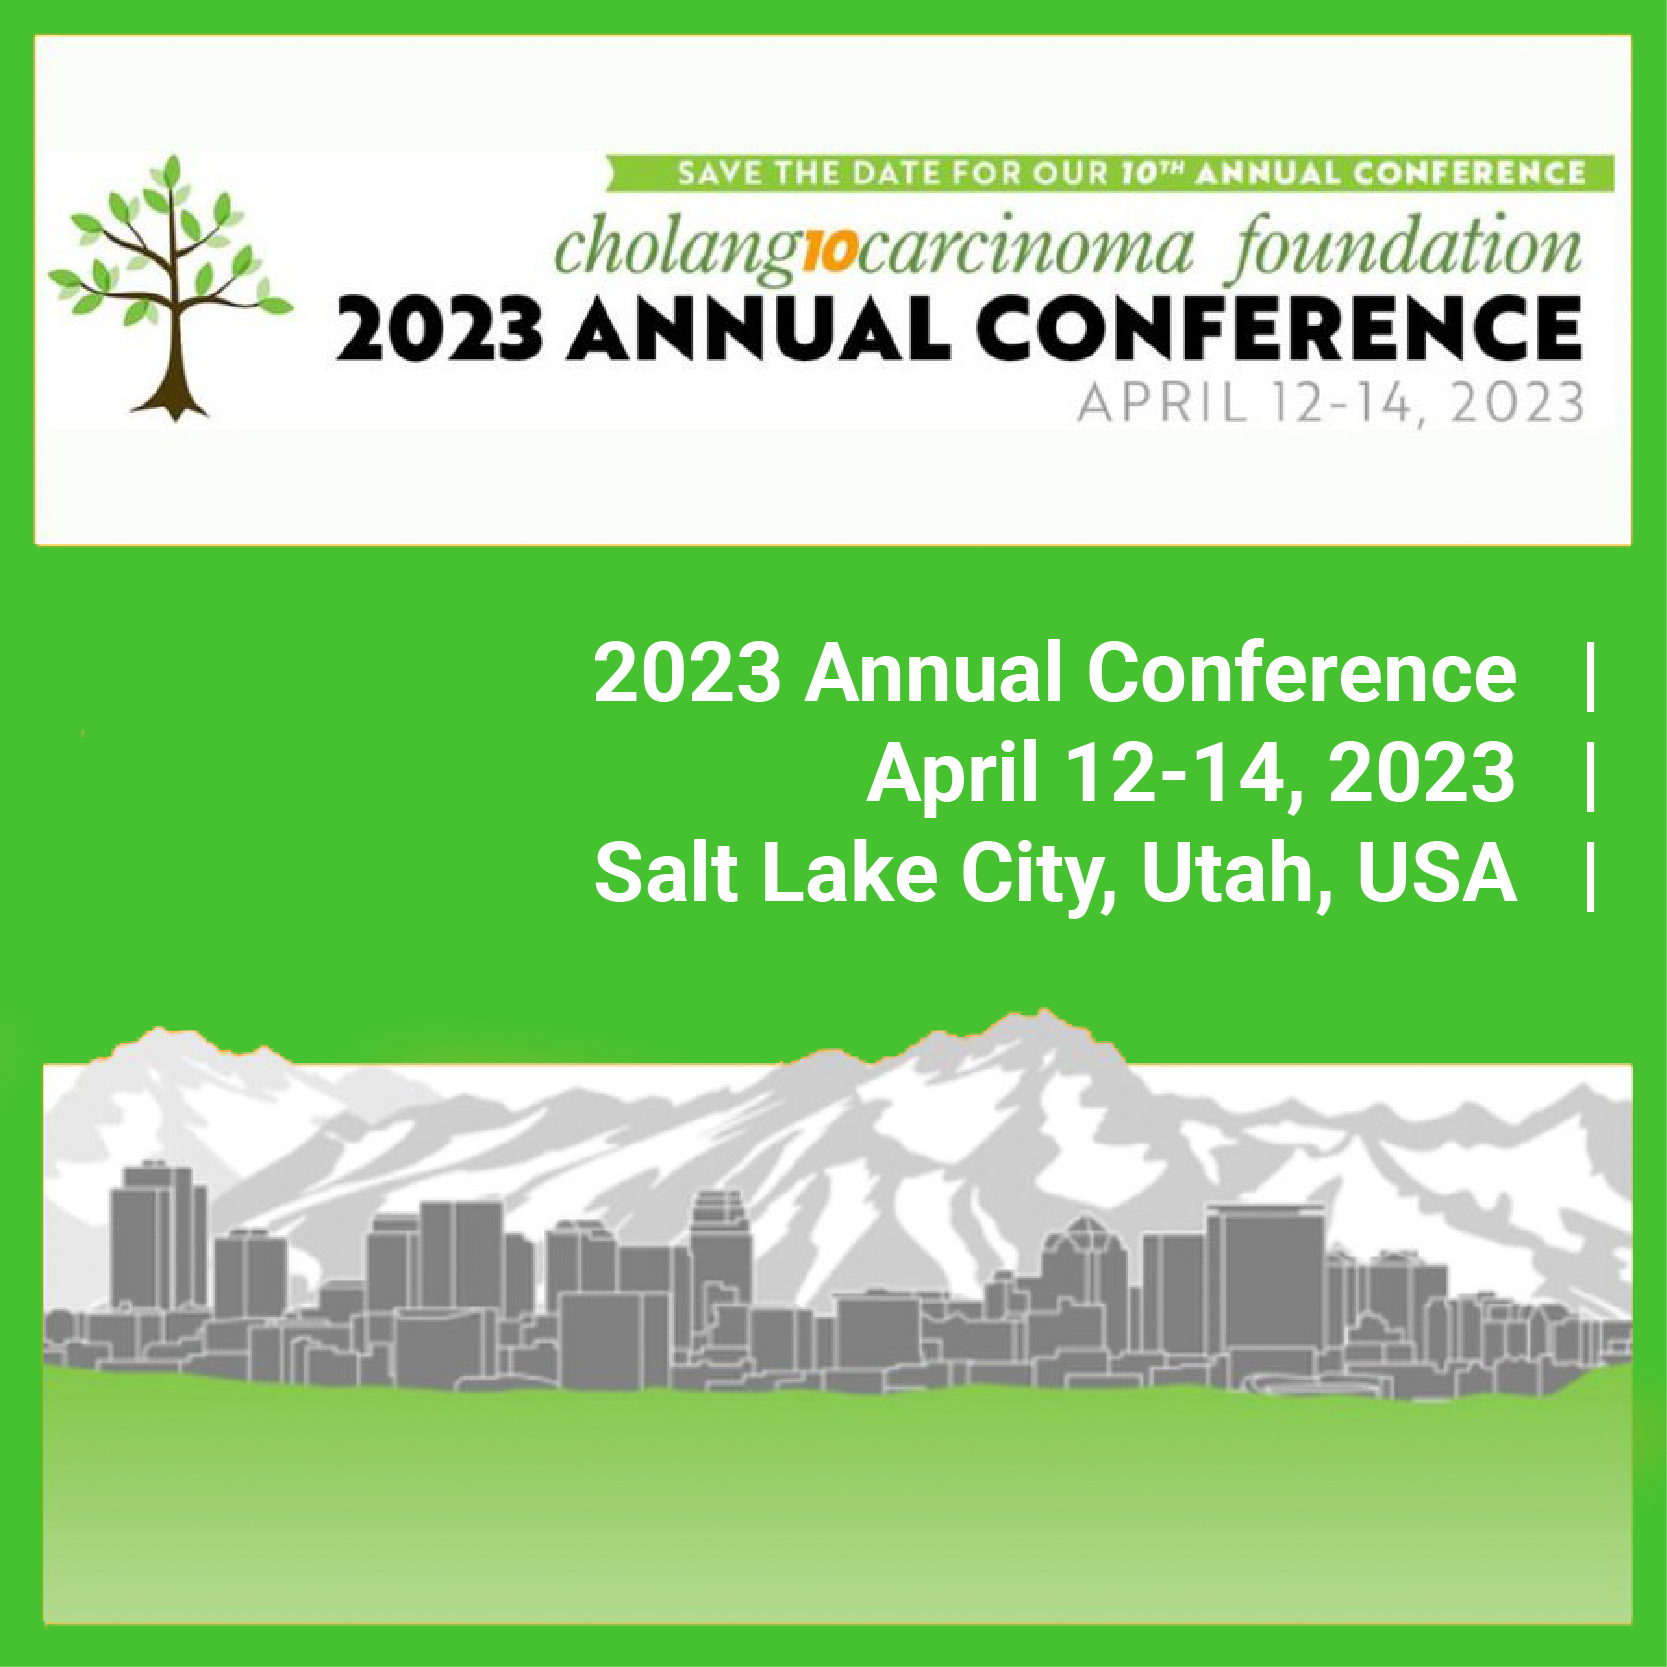 The 10th Annual Cholangiocarcinoma Foundation Conference 2023